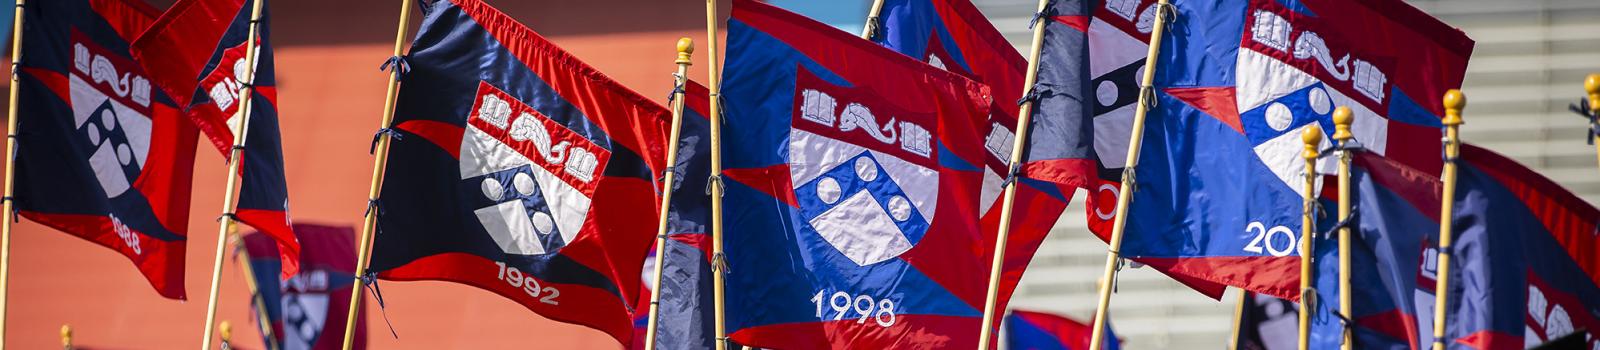 Penn Alumni class year flags at Commencement 